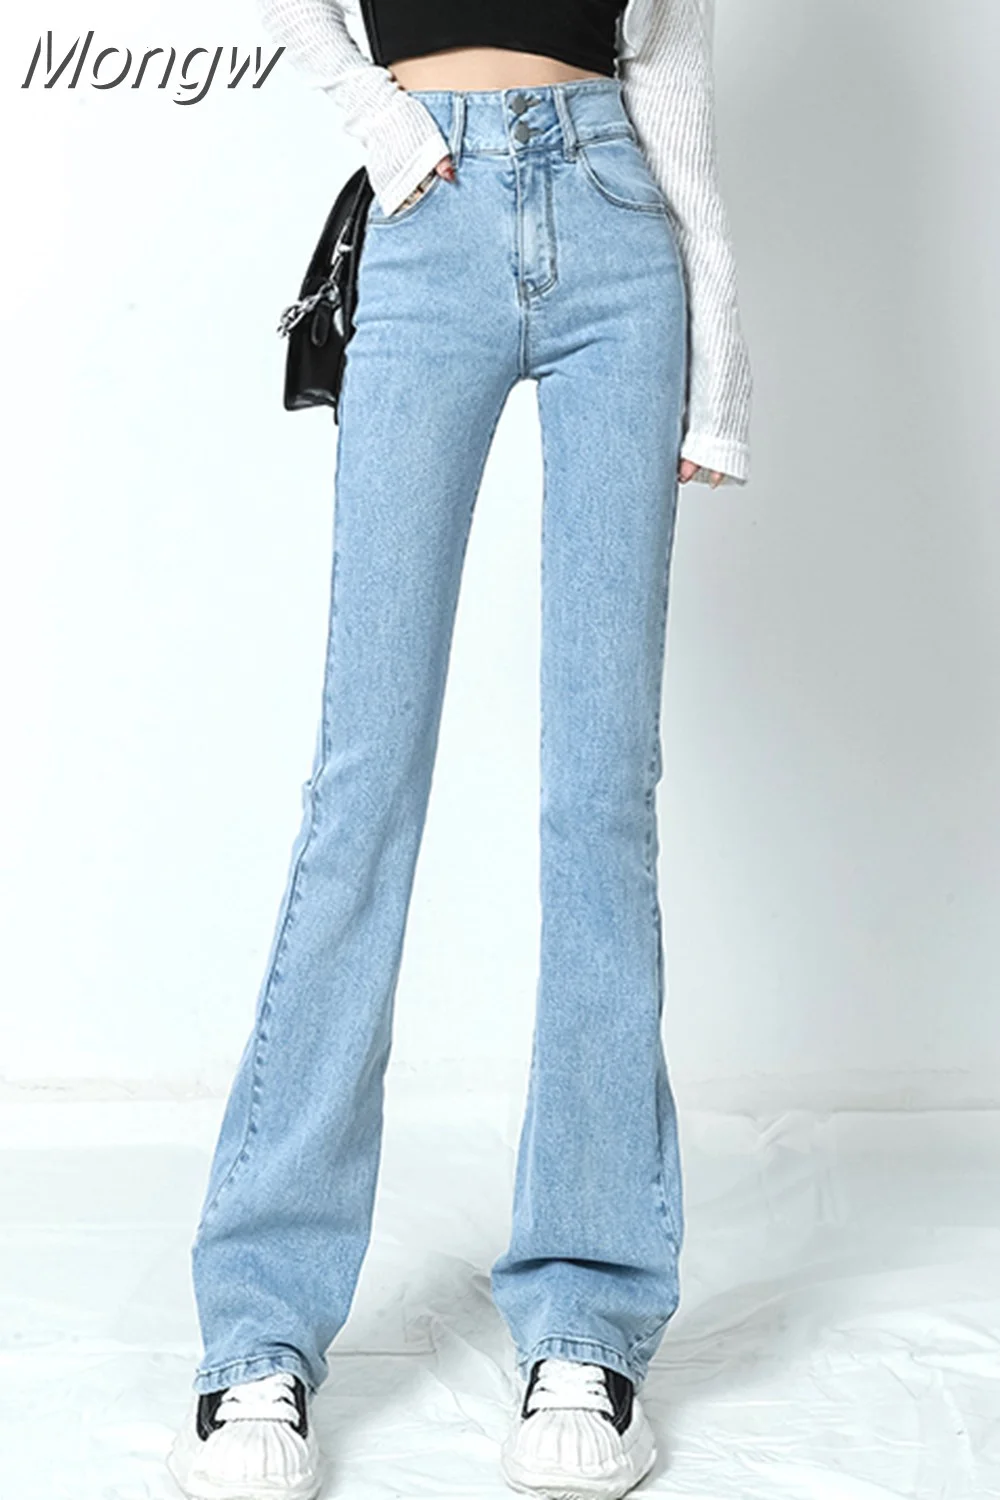 Mongw 2023 New Flared Jeans Women Sexy Hip Lift High Waist Stretch Denim Pencil Pants Washed Slim Skinny Y2K Female Trousers